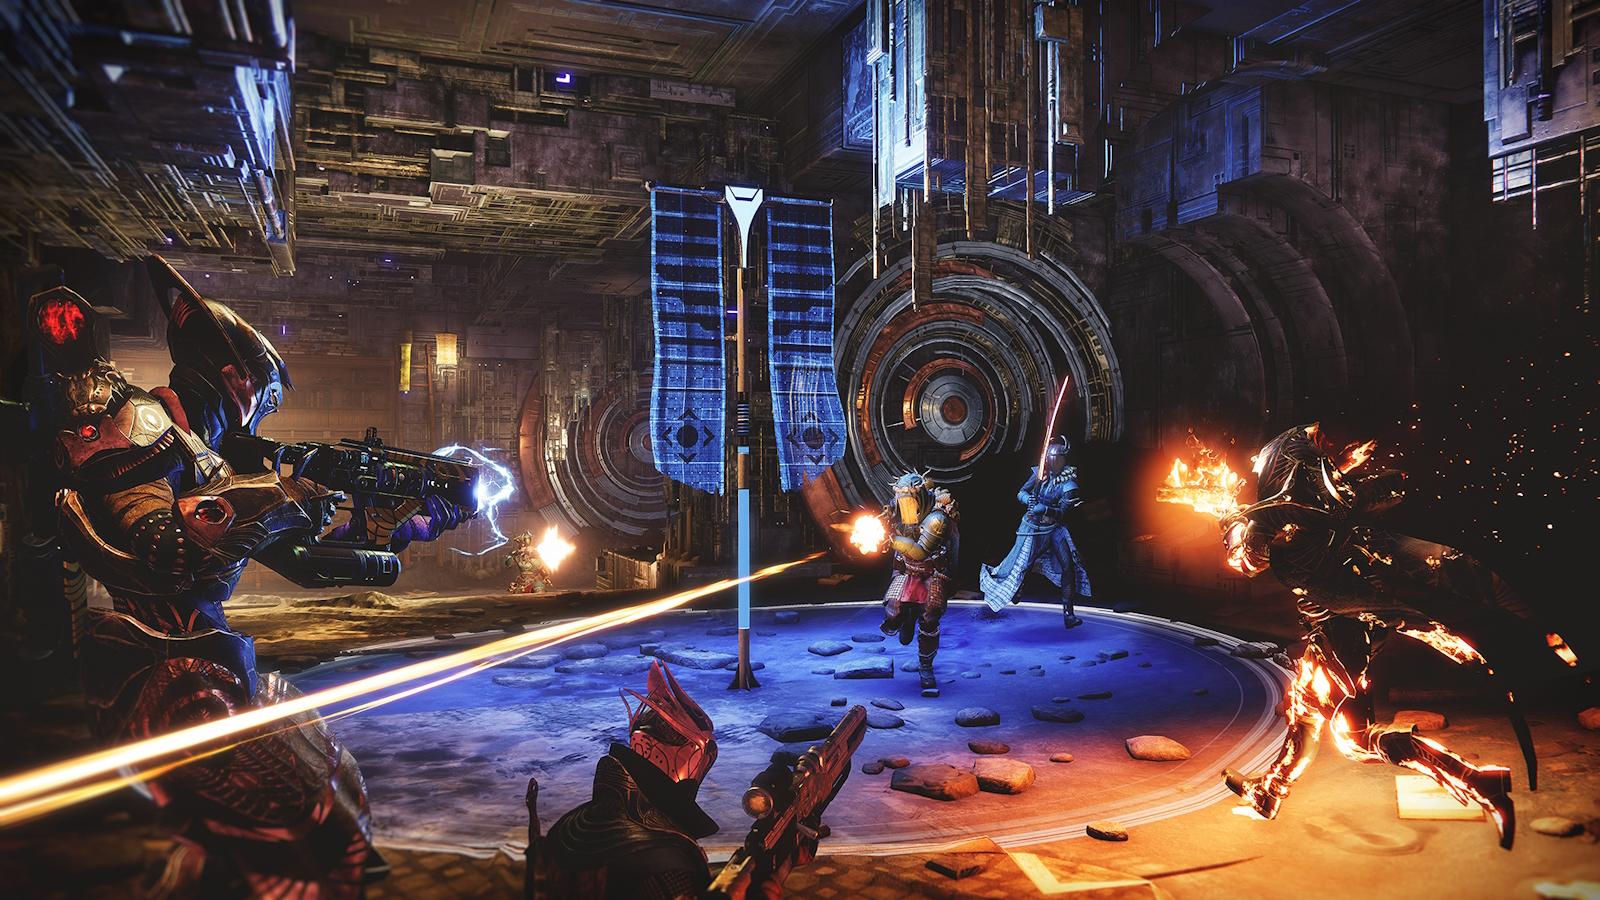 Destiny 2 players fighting over capture point in Checkmate Trials of Osiris PvP mode.